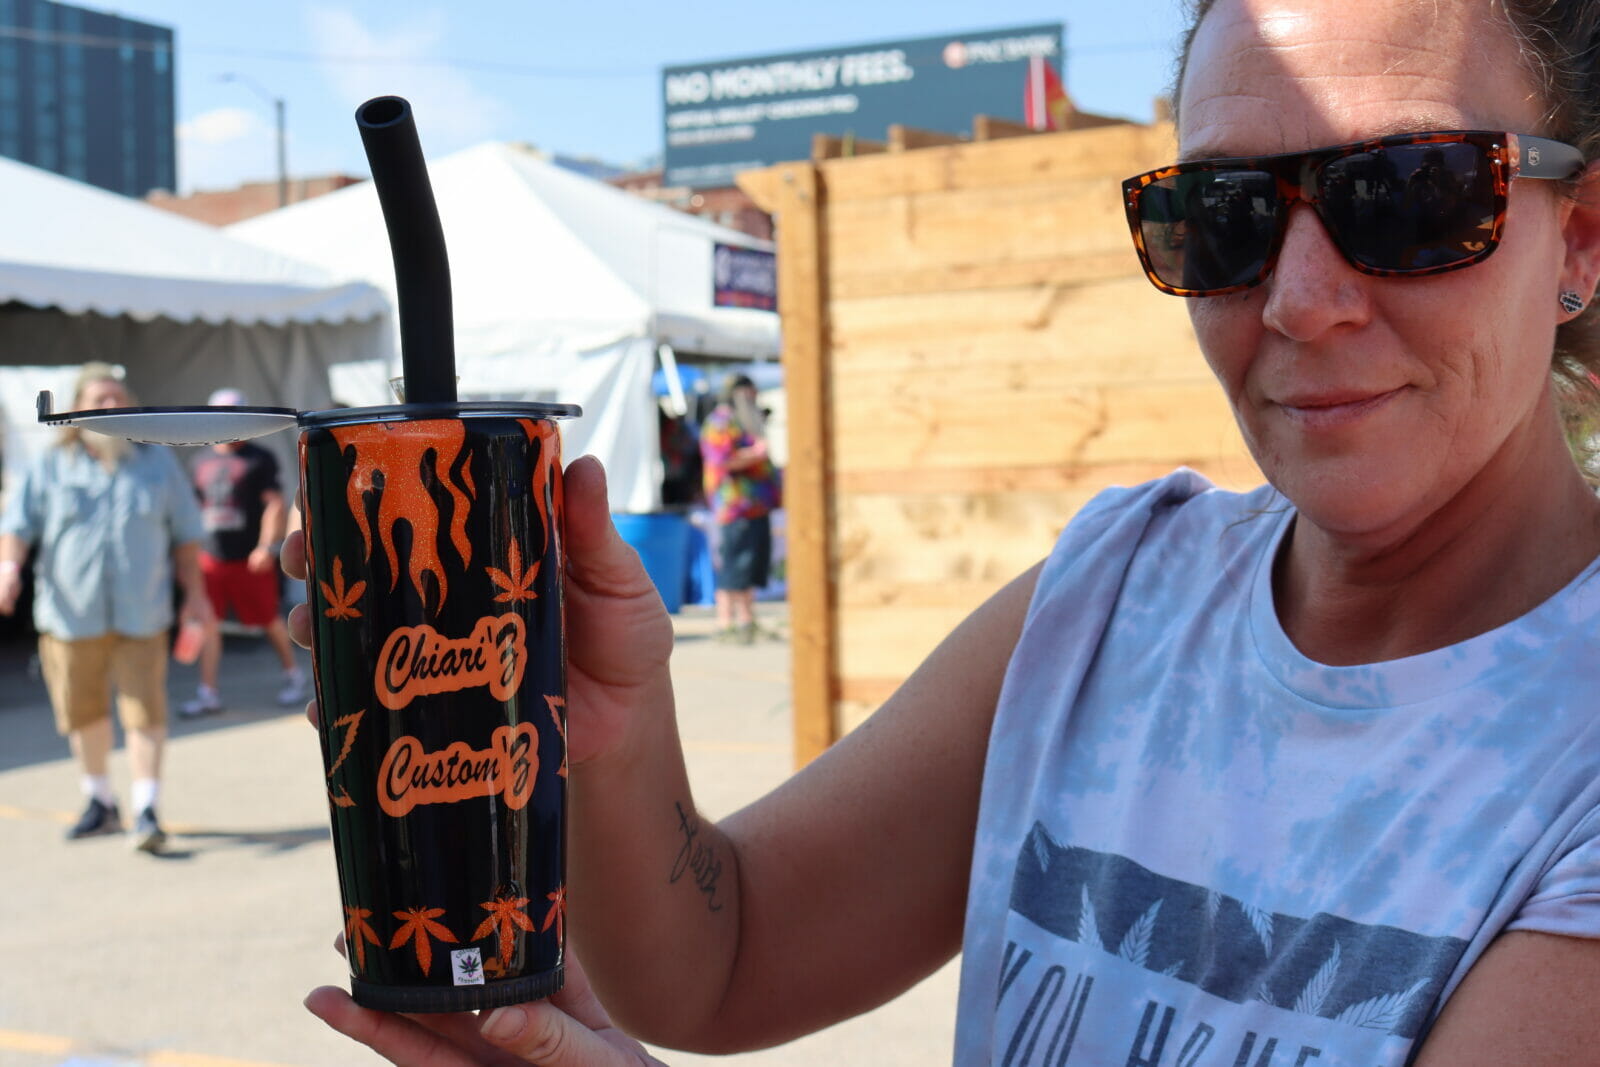 A woman holds up a cup decorated with Harley Davidson flames and cannabis leaves. In the center it reads "Chiari'z Custom'z" the cup has a straw and a bowl attached to it.